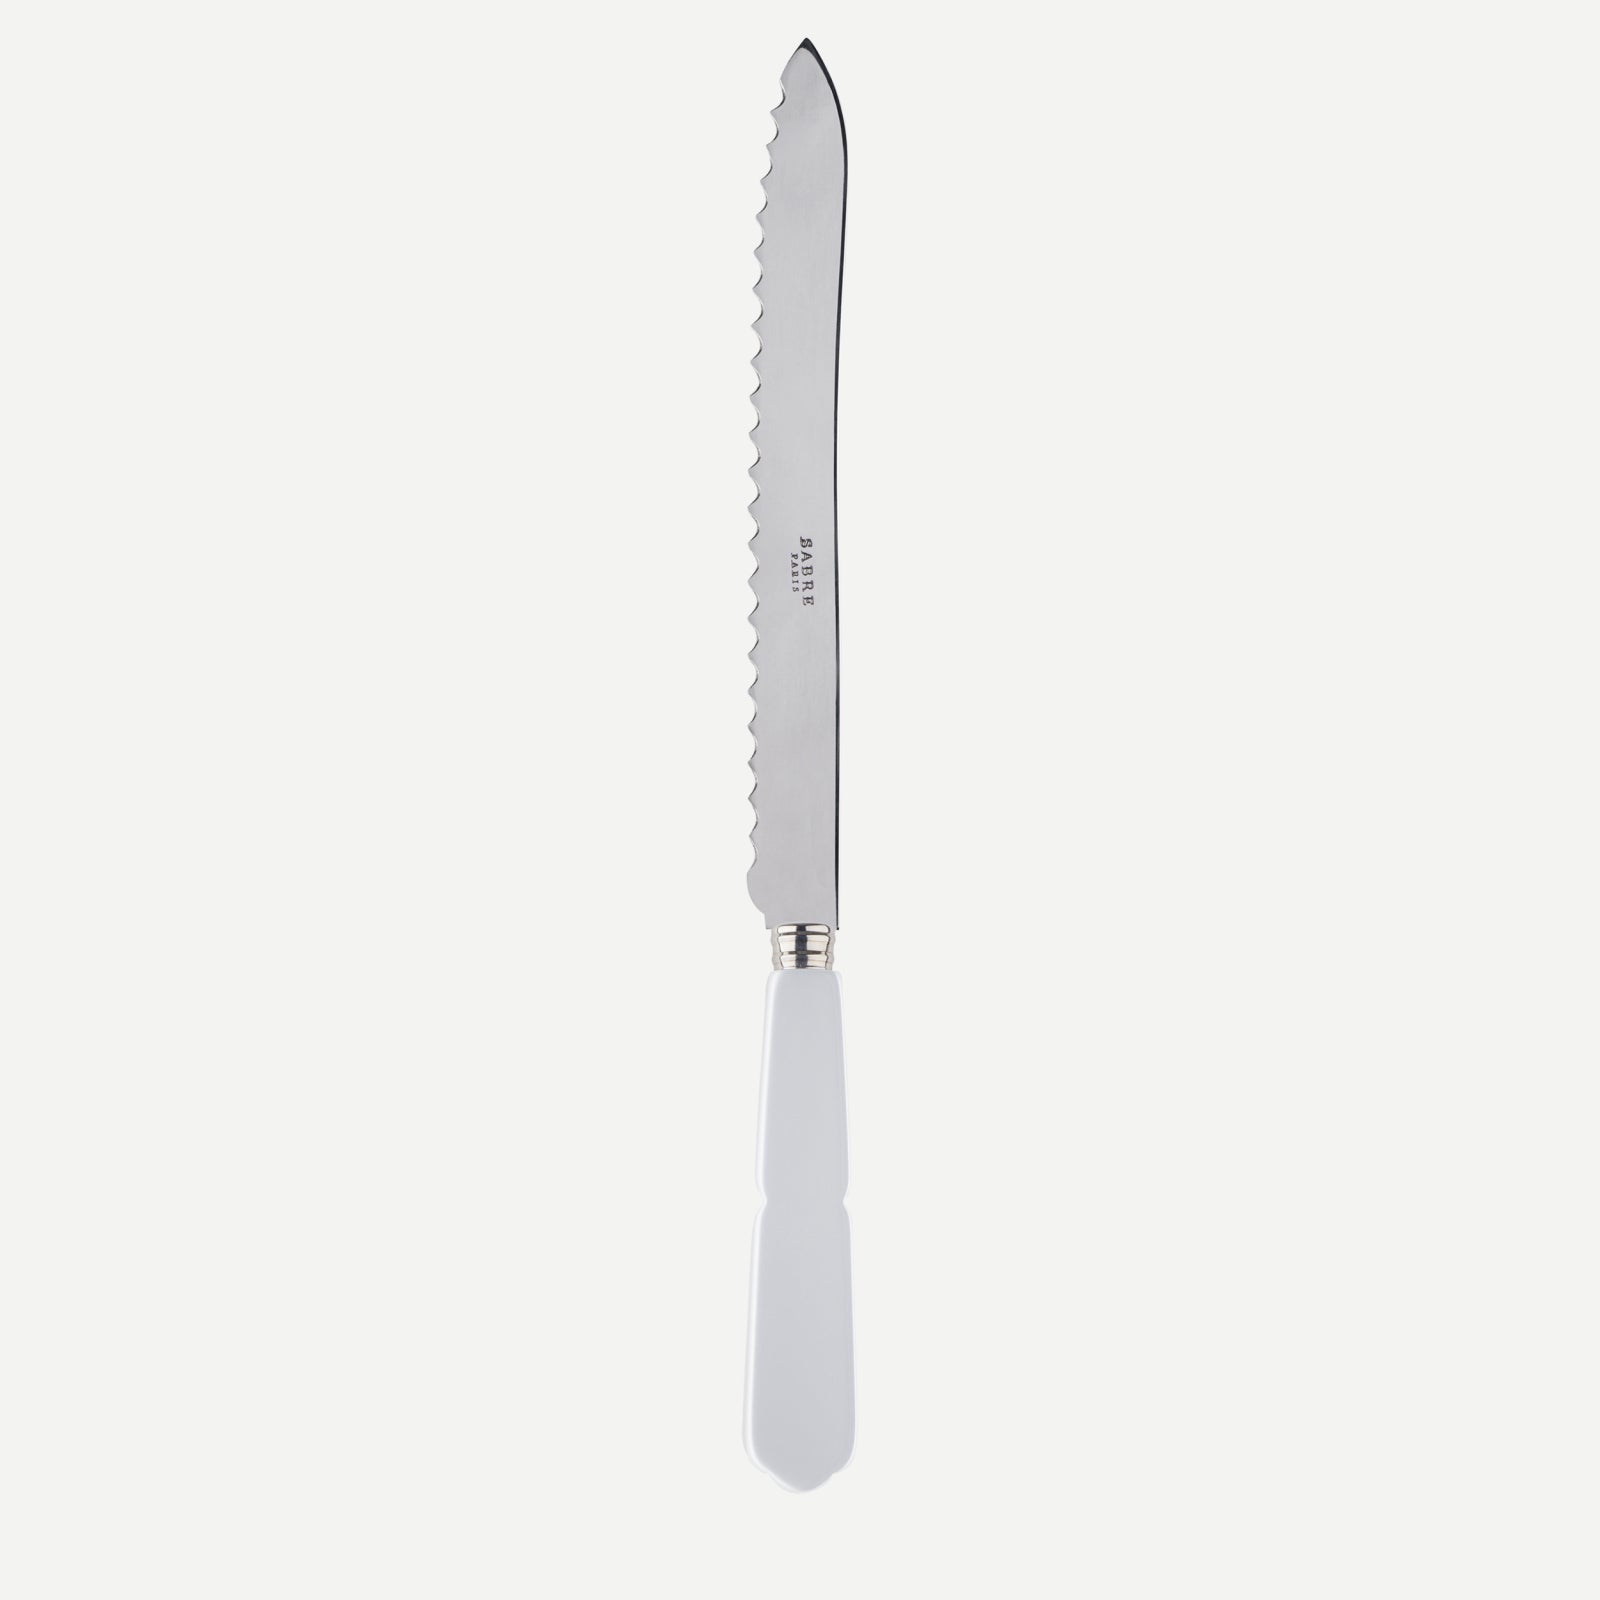 Bread knife - Gustave - White